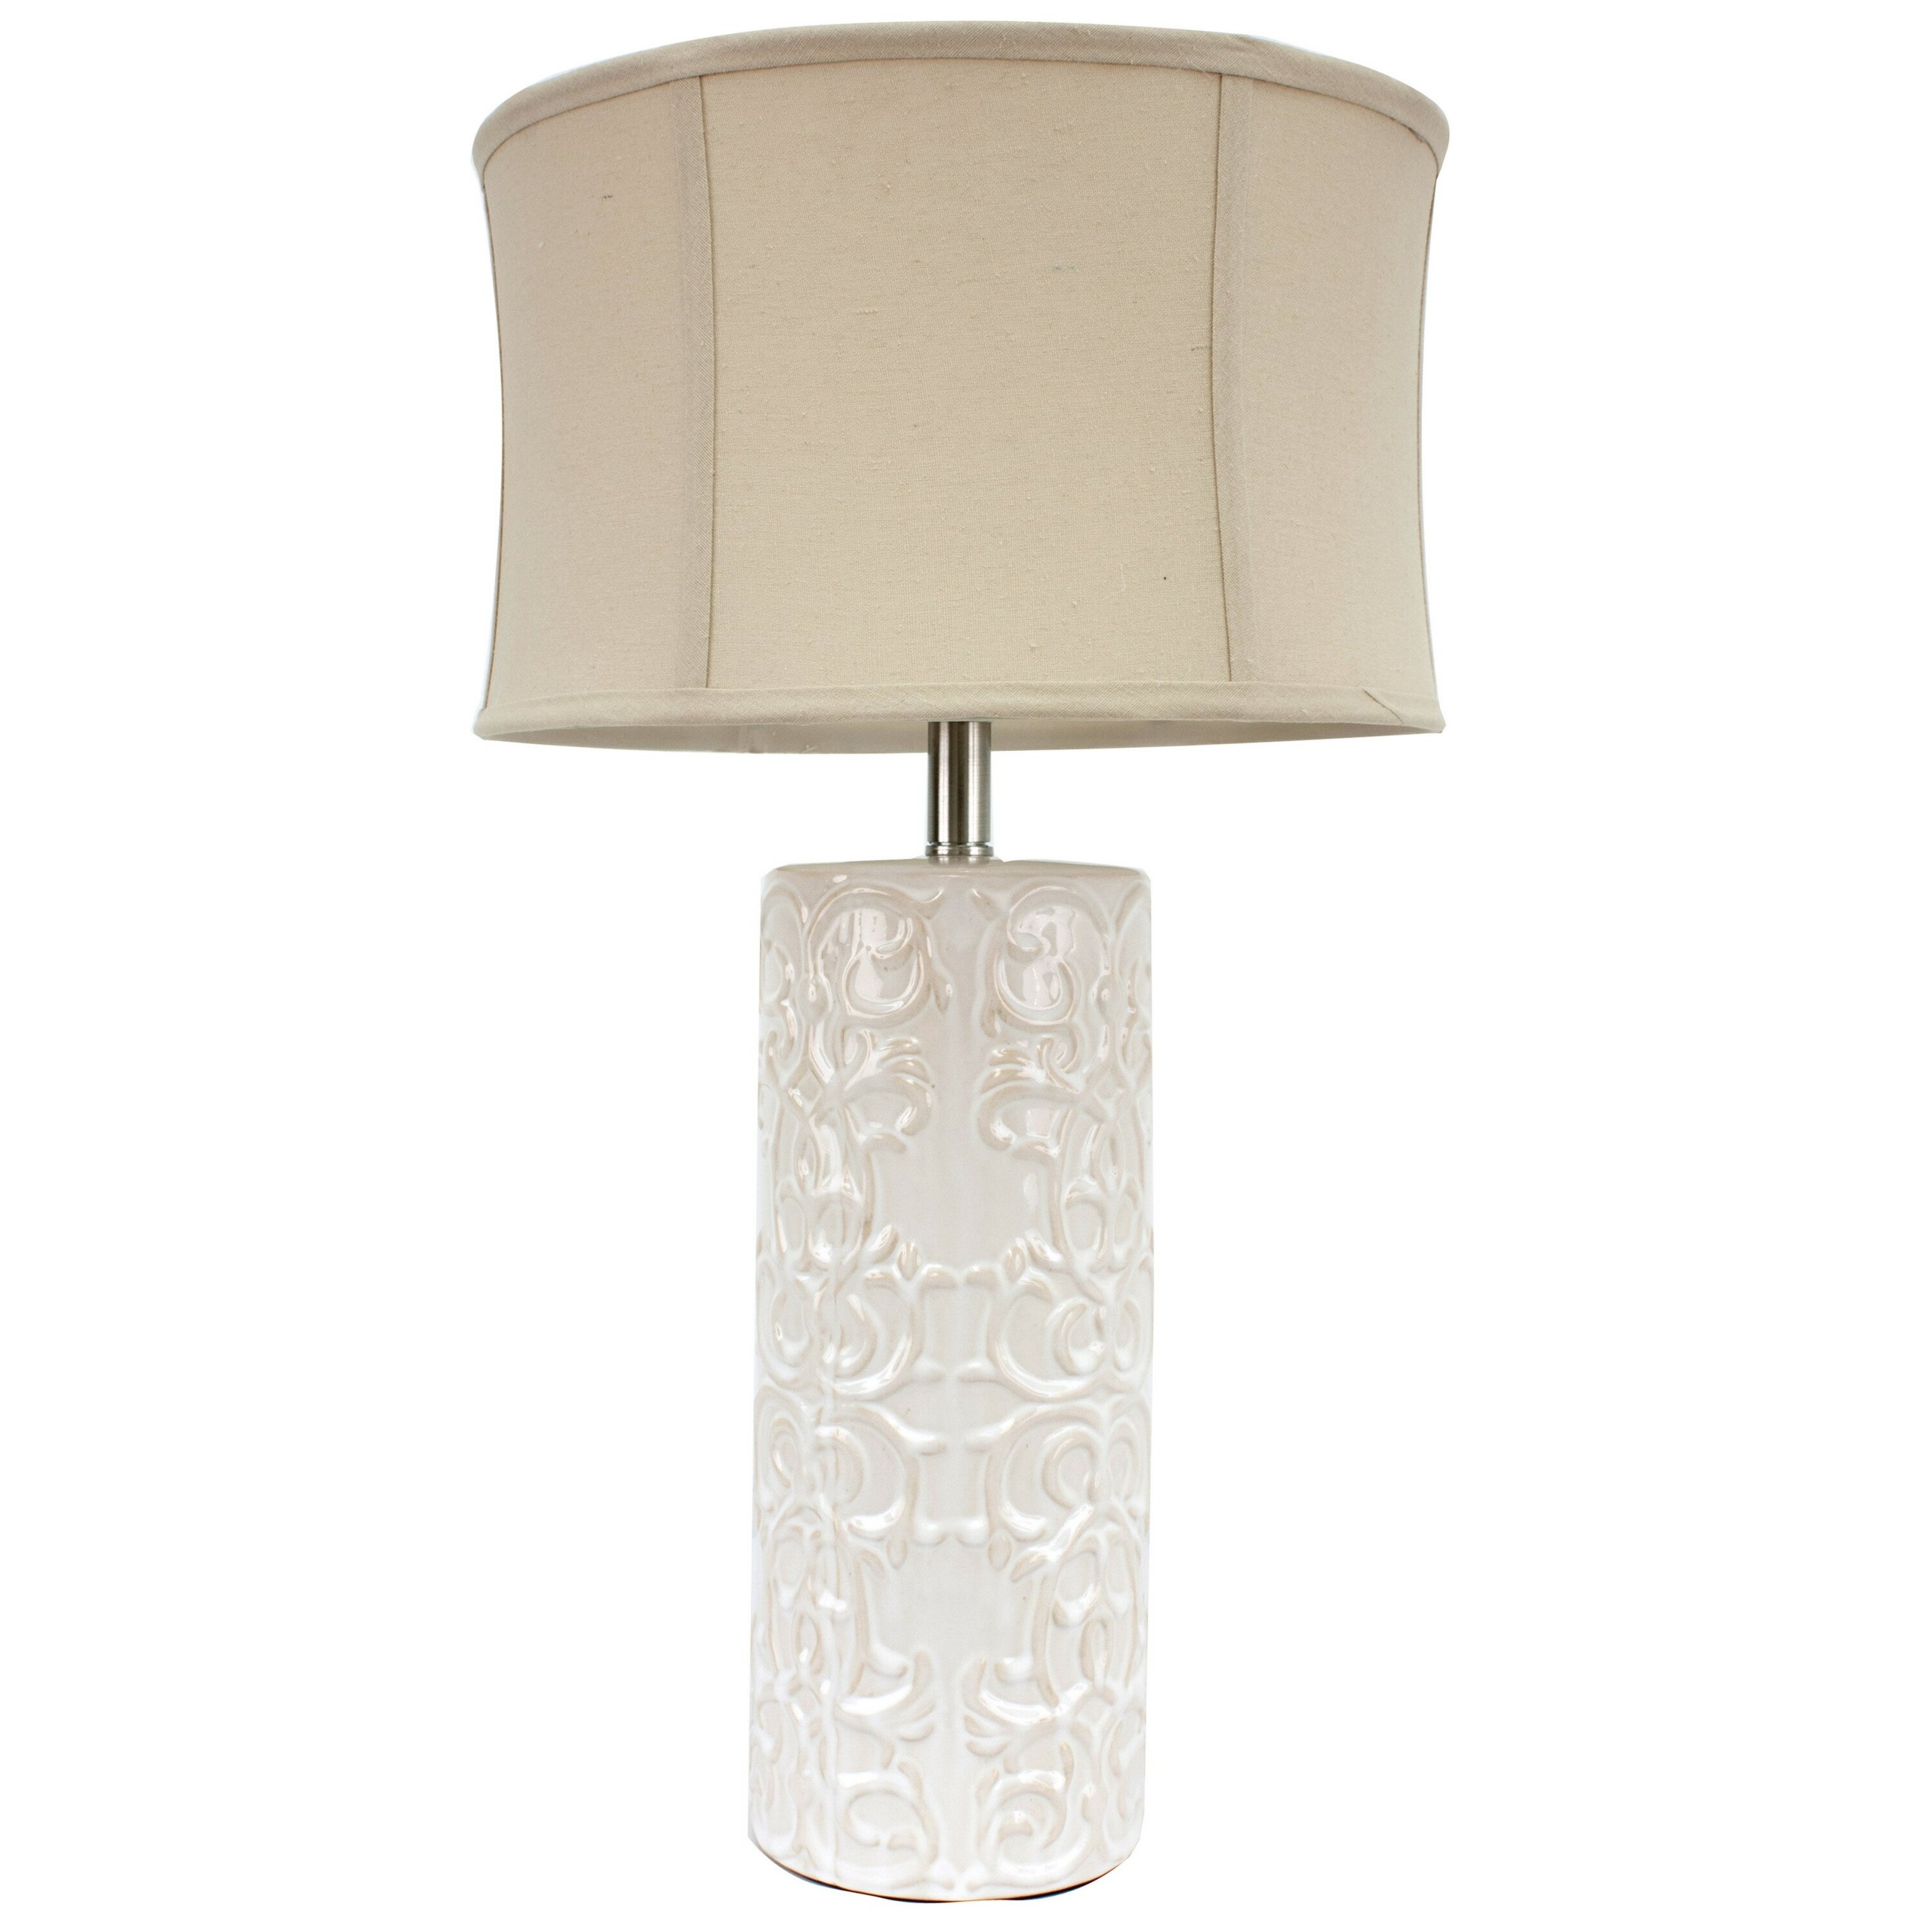 26" H Table Lamp with Drum Shade